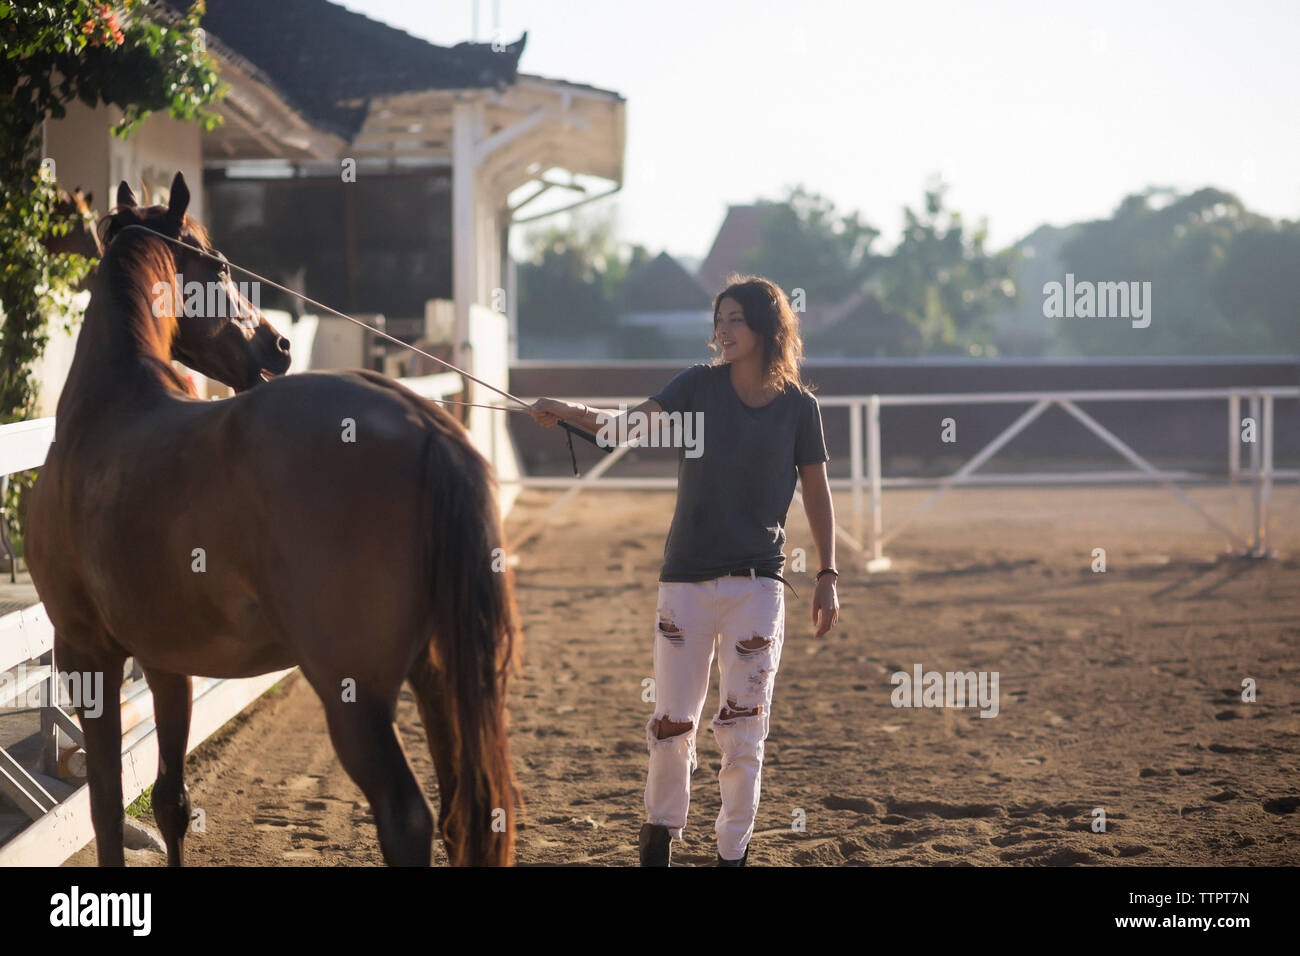 Woman touching horse with animal care equipment while standing at ranch Stock Photo